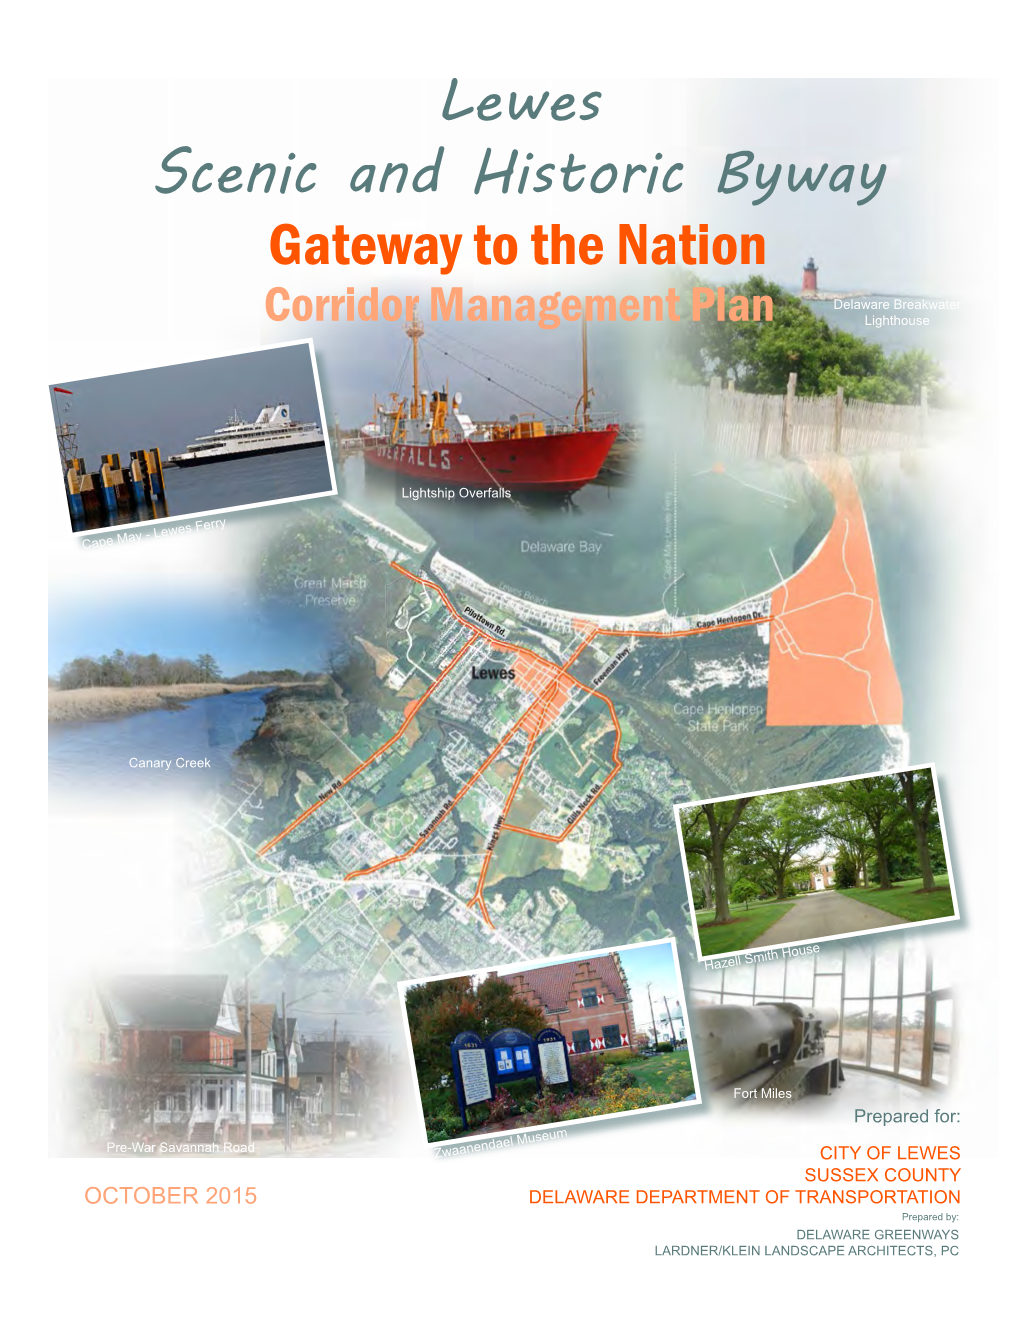 Lewes Scenic and Historic Byway Gateway to the Nation